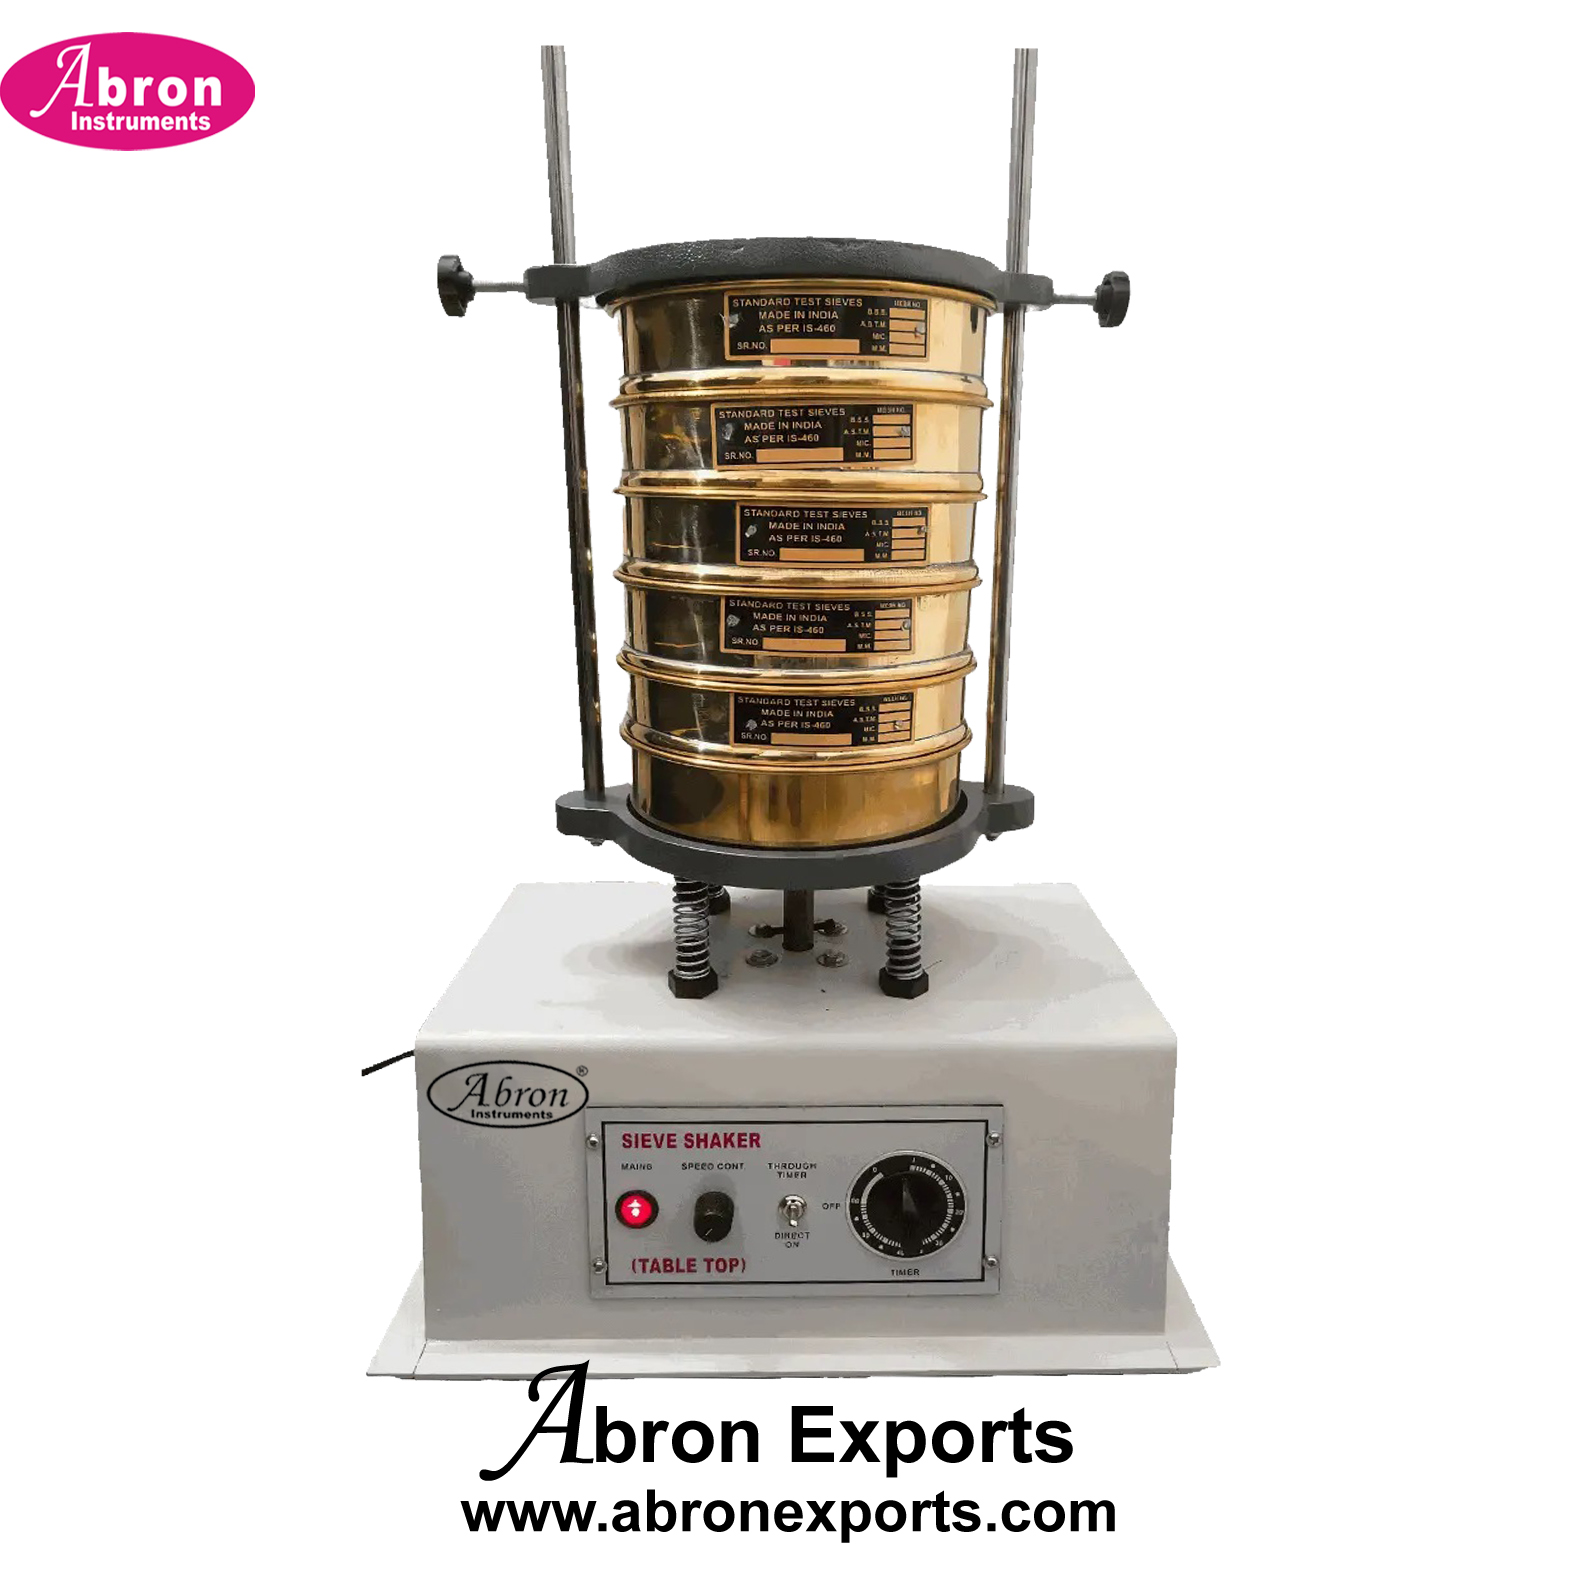 Sieves Shaker Electric Table Top With Speed Regulator And Pharmacy 6 Sieves Lid And Pan Set Soil Testing Pharmacy Sieve Set 6+1 lid 1 Pan Set Abron ASI-170GP6 